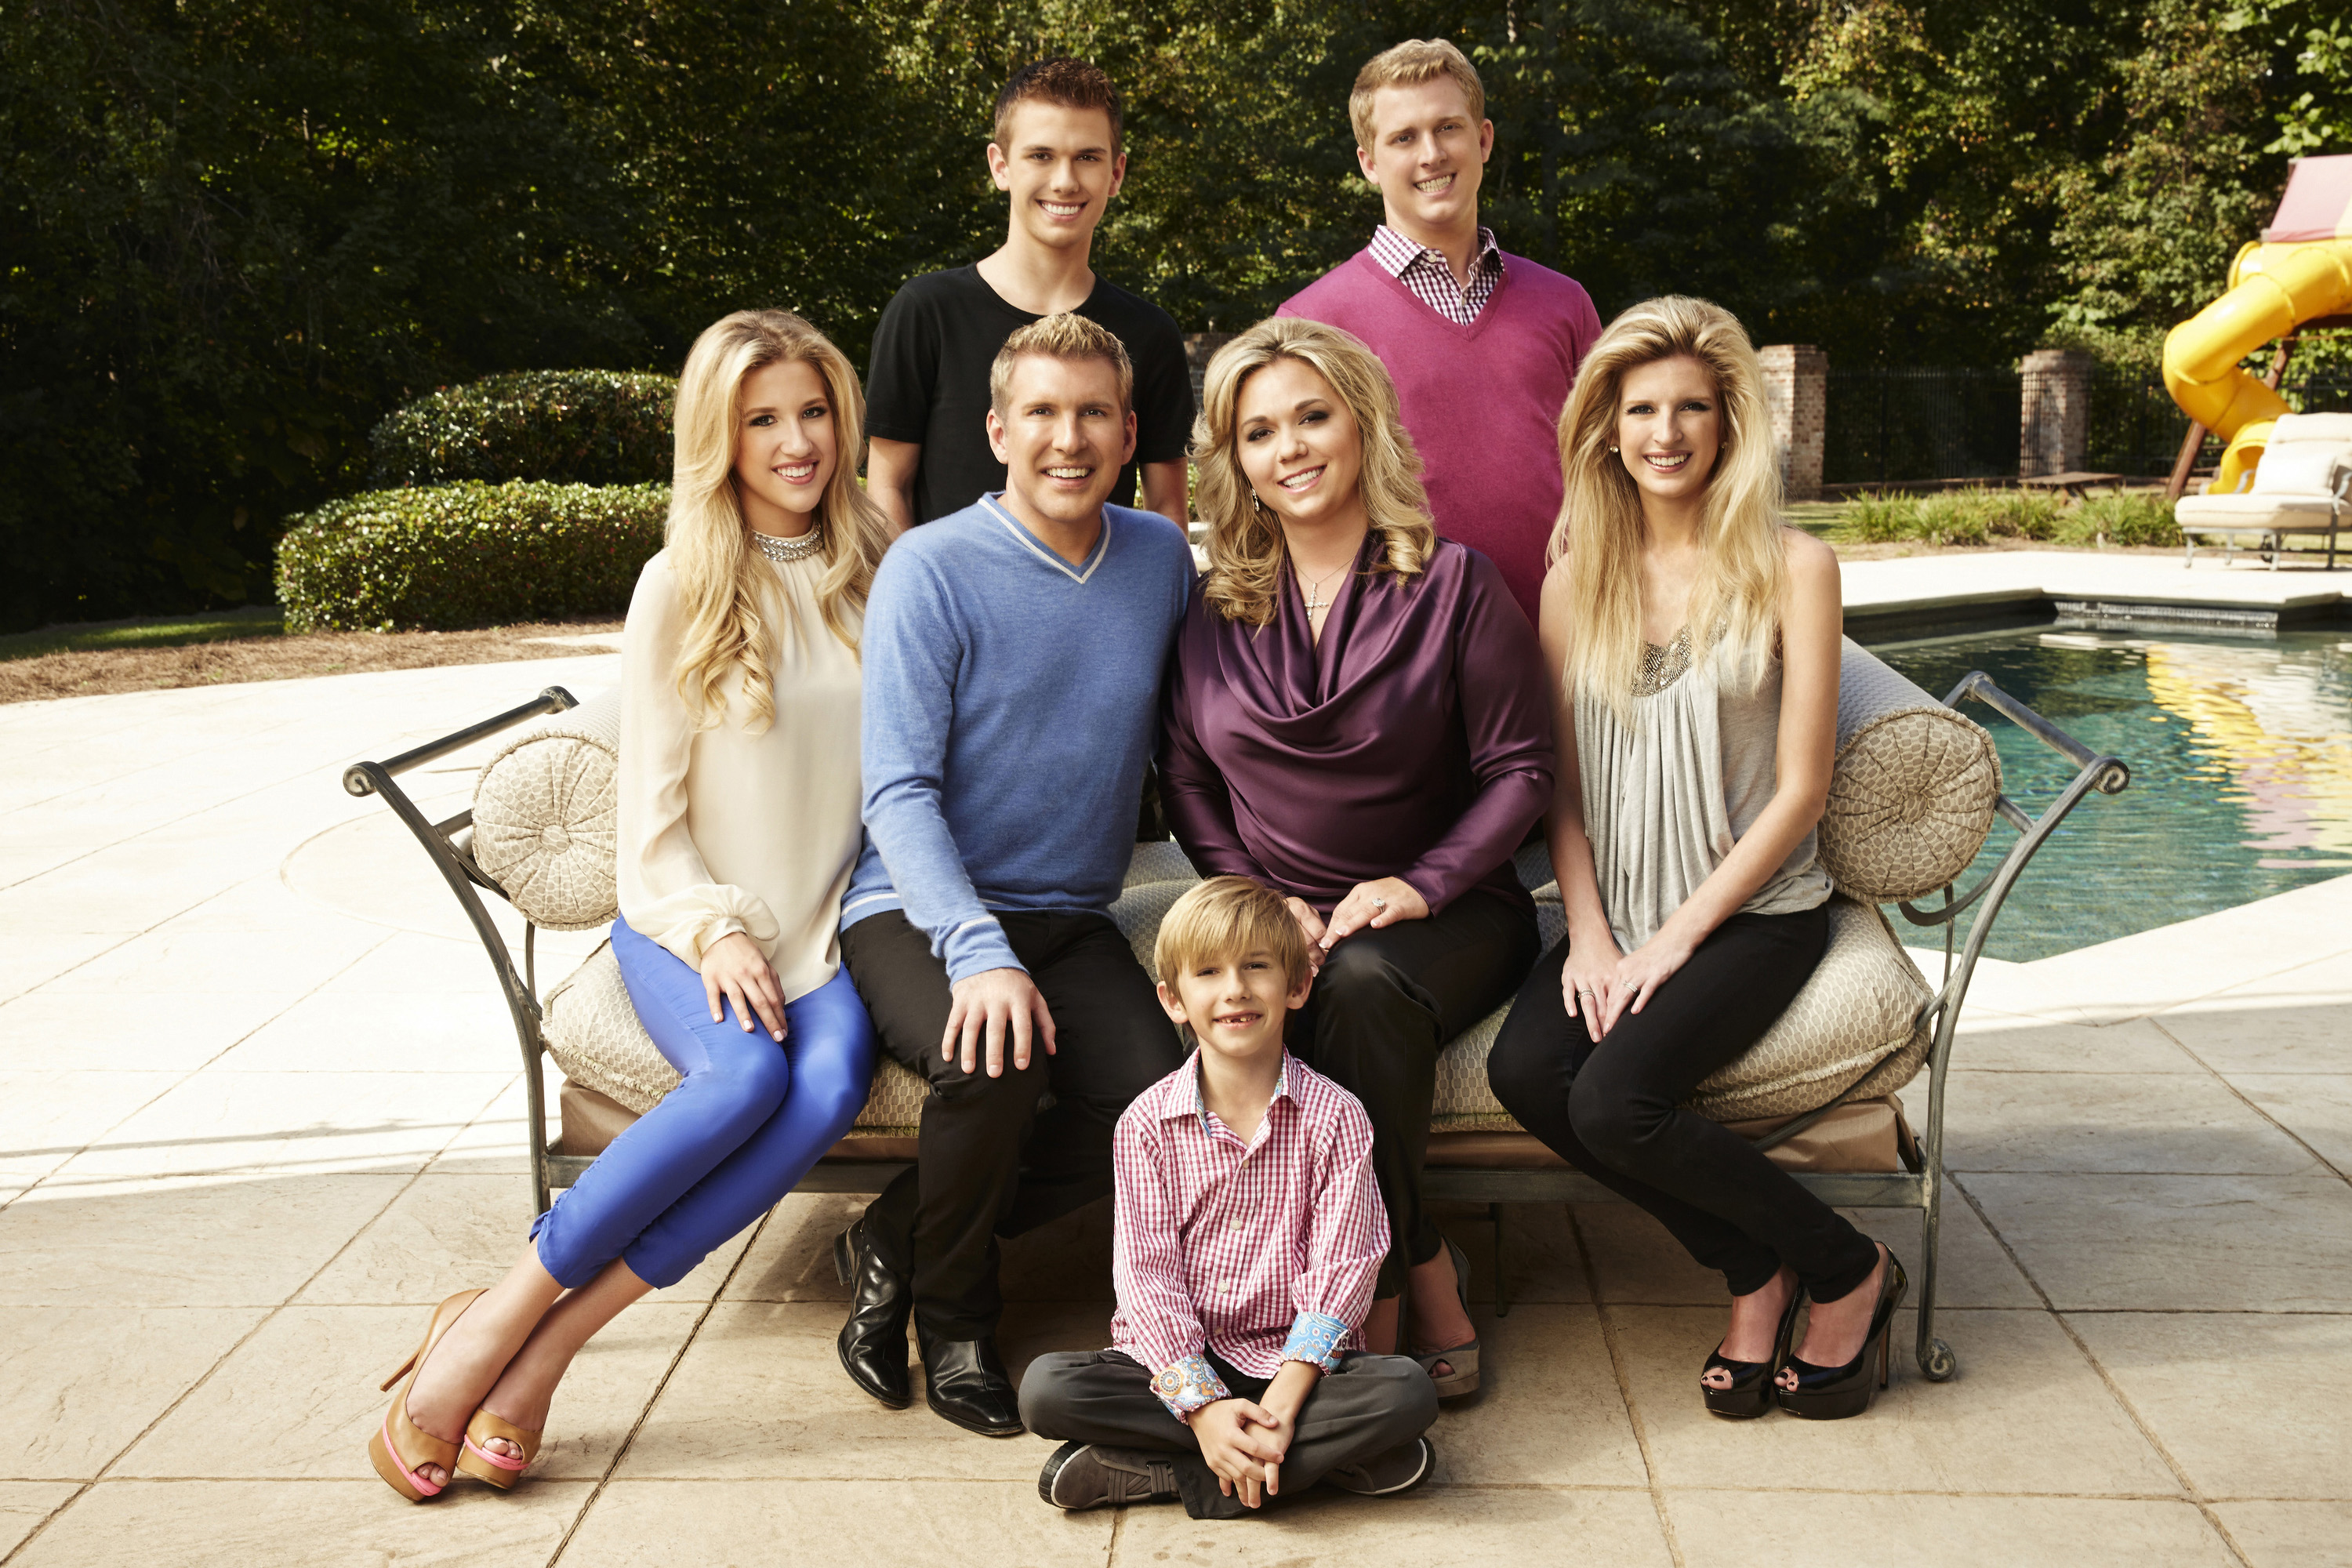 Savannah Chrisley, Todd Chrisley, Chase Chrisley, Grayson Chrisley, Julie Chrisley, Kyle Chrisley, Lindsie Chrisley Campbell during Season 1 of "Chrisley Knows Best" in 2013 | Source: Getty Images